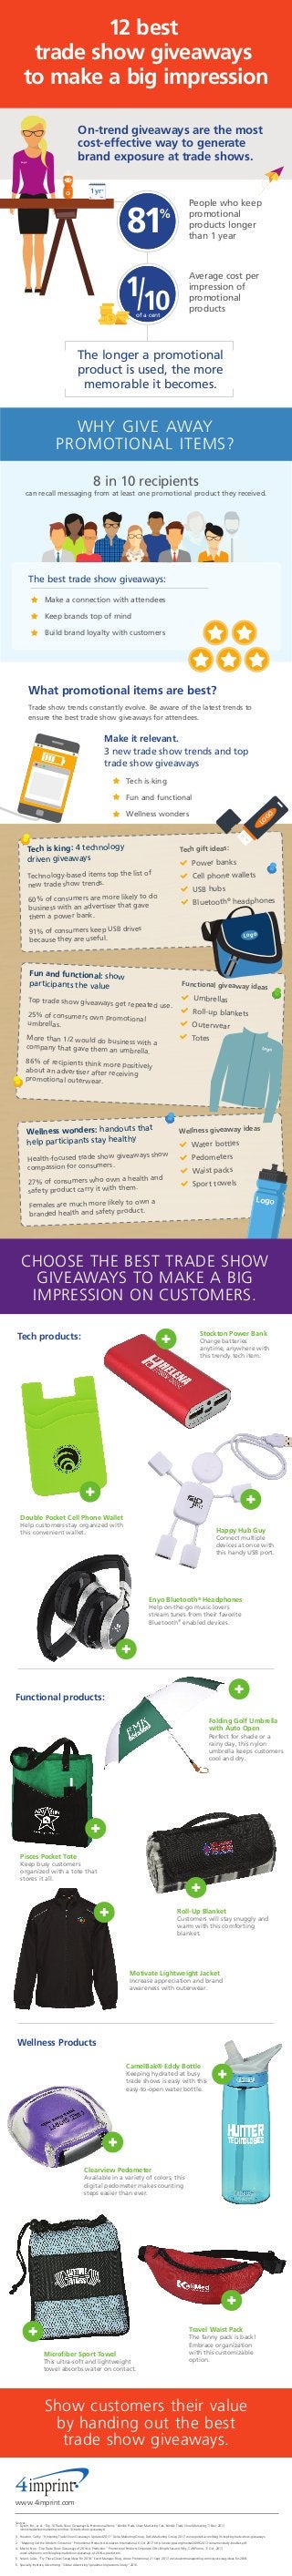 12 best
trade show giveaways
to make a big impression
On-trend giveaways are the most
cost-effective way to generate
brand exposure at trade shows.
People who keep
promotional
products longer
than 1 year
Logo
81%
Average cost per
impression of
promotional
products
1/10
Ɲ
Logo
of a cent
Logo
WHY GIVE AWAY
PROMOTIONAL ITEMS?
The longer a promotional
product is used, the more
memorable it becomes.
1yr+
Logo
The best trade show giveaways:
Make it relevant.
3 new trade show trends and top
trade show giveaways
What promotional items are best?
Make a connection with attendees
Keep brands top of mind
Build brand loyalty with customers
8 in 10 recipients
can recall messaging from at least one promotional product they received.
Trade show trends constantly evolve. Be aware of the latest trends to
ensure the best trade show giveaways for attendees.
Logo
Power banks
Cell phone wallets
USB hubs
Bluetooth®
headphones
Tech is king: 4 technology
driven giveaways
Tech gift ideas:
Technology-based items top the list of
new trade show trends.
60% of consumers are more likely to do
business with an advertiser that gave
them a power bank.
91% of consumers keep USB drives
because they are useful.
Umbrellas
Roll-up blankets
Outerwear
Totes
Fun and functional: show
participants the value Functional giveaway ideas
Top trade show giveaways get repeated use.
25% of consumers own promotional
umbrellas.
More than 1/2 would do business with acompany that gave them an umbrella.
86% of recipients think more positively
about an advertiser after receiving
promotional outerwear.
Water bottles
Pedometers
Waist packs
Sport towels
Wellness wonders: handouts that
help participants stay healthy
Wellness giveaway ideas
Health-focused trade show giveaways show
compassion for consumers.
27% of consumers who own a health and
safety product carry it with them.
Females are much more likely to own a
branded health and safety product.
Tech is king
Fun and functional
Wellness wonders
Tech products:
Functional products:
Wellness Products
Double Pocket Cell Phone Wallet
Help customers stay organized with
this convenient wallet. Happy Hub Guy
Connect multiple
devices at once with
this handy USB port.
Enyo Bluetooth®
Headphones
Help on-the-go music lovers
stream tunes from their favorite
Bluetooth®
enabled devices.
Pisces Pocket Tote
Keep busy customers
organized with a tote that
stores it all.
Folding Golf Umbrella
with Auto Open
Perfect for shade or a
rainy day, this nylon
umbrella keeps customers
cool and dry.
CamelBak® Eddy Bottle
Keeping hydrated at busy
trade shows is easy with this
easy-to-open water bottle.
Stockton Power Bank
Charge batteries
anytime, anywhere with
this trendy tech item.
Roll-Up Blanket
Customers will stay snuggly and
warm with this comforting
blanket.
Motivate Lightweight Jacket
Increase appreciation and brand
awareness with outerwear.
Travel Waist Pack
The fanny pack is back!
Embrace organization
with this customizable
option.
Clearview Pedometer
Available in a variety of colors, this
digital pedometer makes counting
steps easier than ever.
Microfiber Sport Towel
This ultra-soft and lightweight
towel absorbs water on contact.
Sources:
1. Dyson, Eric, et al. “Top 10 Trade Show Giveaways & Promotional Items.” Nimlok Trade Show Marketing Tips, Nimlok Trade Show Marketing, 7 Nov. 2017,
nimloktradeshowmarketing.com/top-10-trade-show-giveaways/.
3. Houston, Cathy. “9 Inspiring Trade Show Giveaways: Updated 2017.” Delta Marketing Group, Delta Marketing Group, 2017, www.godelta.com/blog/9-inspiring-trade-show-giveaways.
2. “Mapping Out the Modern Consumer.” Promotional Products Association International, 6 Oct 2017. http://www.ppai.org/media/2099/2017-consumer-study-booklet.pdf.
4. Martin, Neo. “Top Trade Show Giveaways of 2018: A Prediction.” Promotional Products Corporate Gifts Blog What and Why, C2B Promo, 11 Oct. 2017,
www.c2bpromo.com/blog/top-tradeshow-giveaways-of-2018-a-prediction/.
5. Solaris, Julius. “Try These Clever Swag Ideas For 2018.” Event Manager Blog, Arrow Promotional, 21 Sept. 2017, www.eventmanagerblog.com/clever-swag-ideas-for-2018.
6. Specialty Institute, Advertising. “Global Advertising Specialties Impressions Study.” 2016.
www.4imprint.com
Show customers their value
by handing out the best
trade show giveaways.
LO
GO
Logo
Logo
Logo
CHOOSE THE BEST TRADE SHOW
GIVEAWAYS TO MAKE A BIG
IMPRESSION ON CUSTOMERS.
 